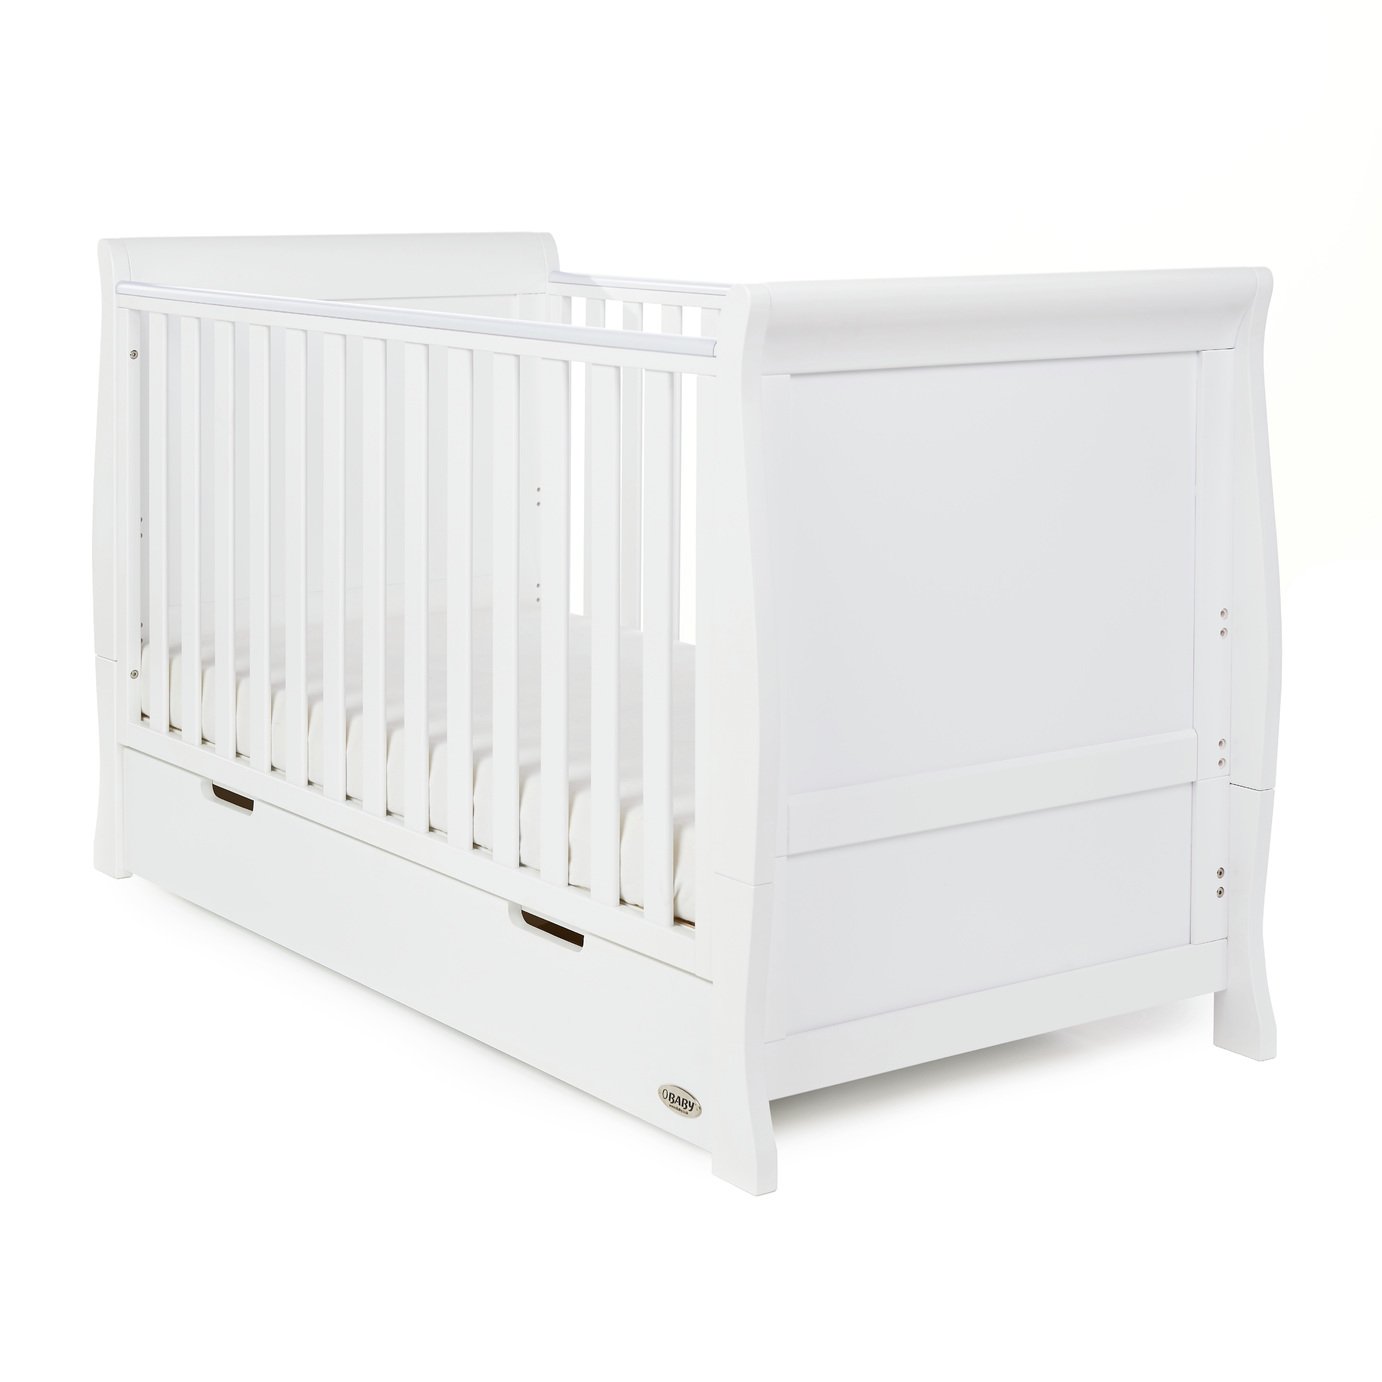 Obaby Stamford Classic Sleigh Cot Bed Review